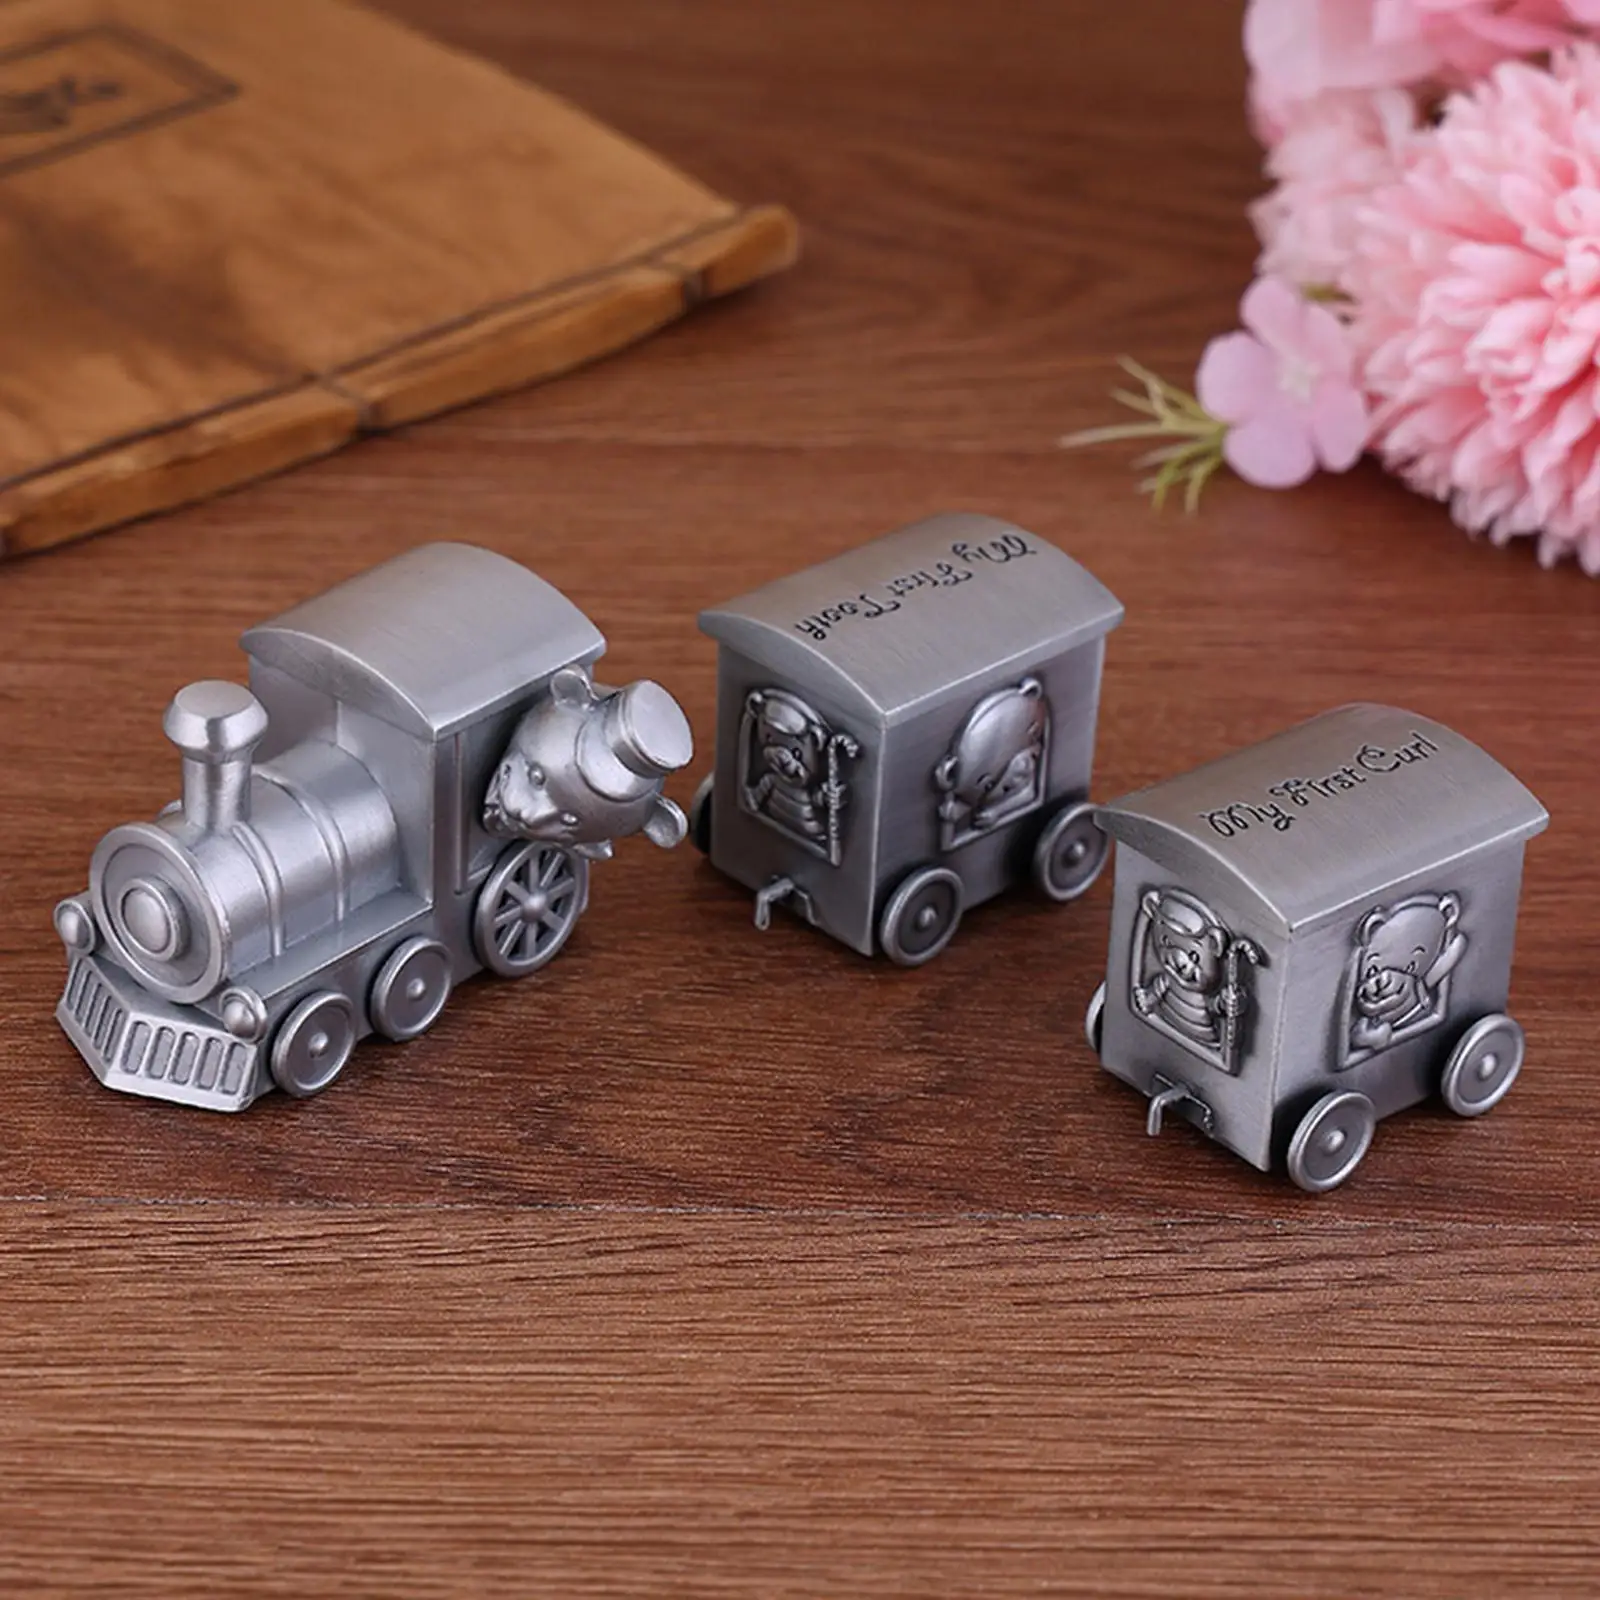 Baby Keepsakes Box Childhood Memory Container Organizer Metal First Curl Box for Childhood Baby Shower Birthday Gift Souvenir